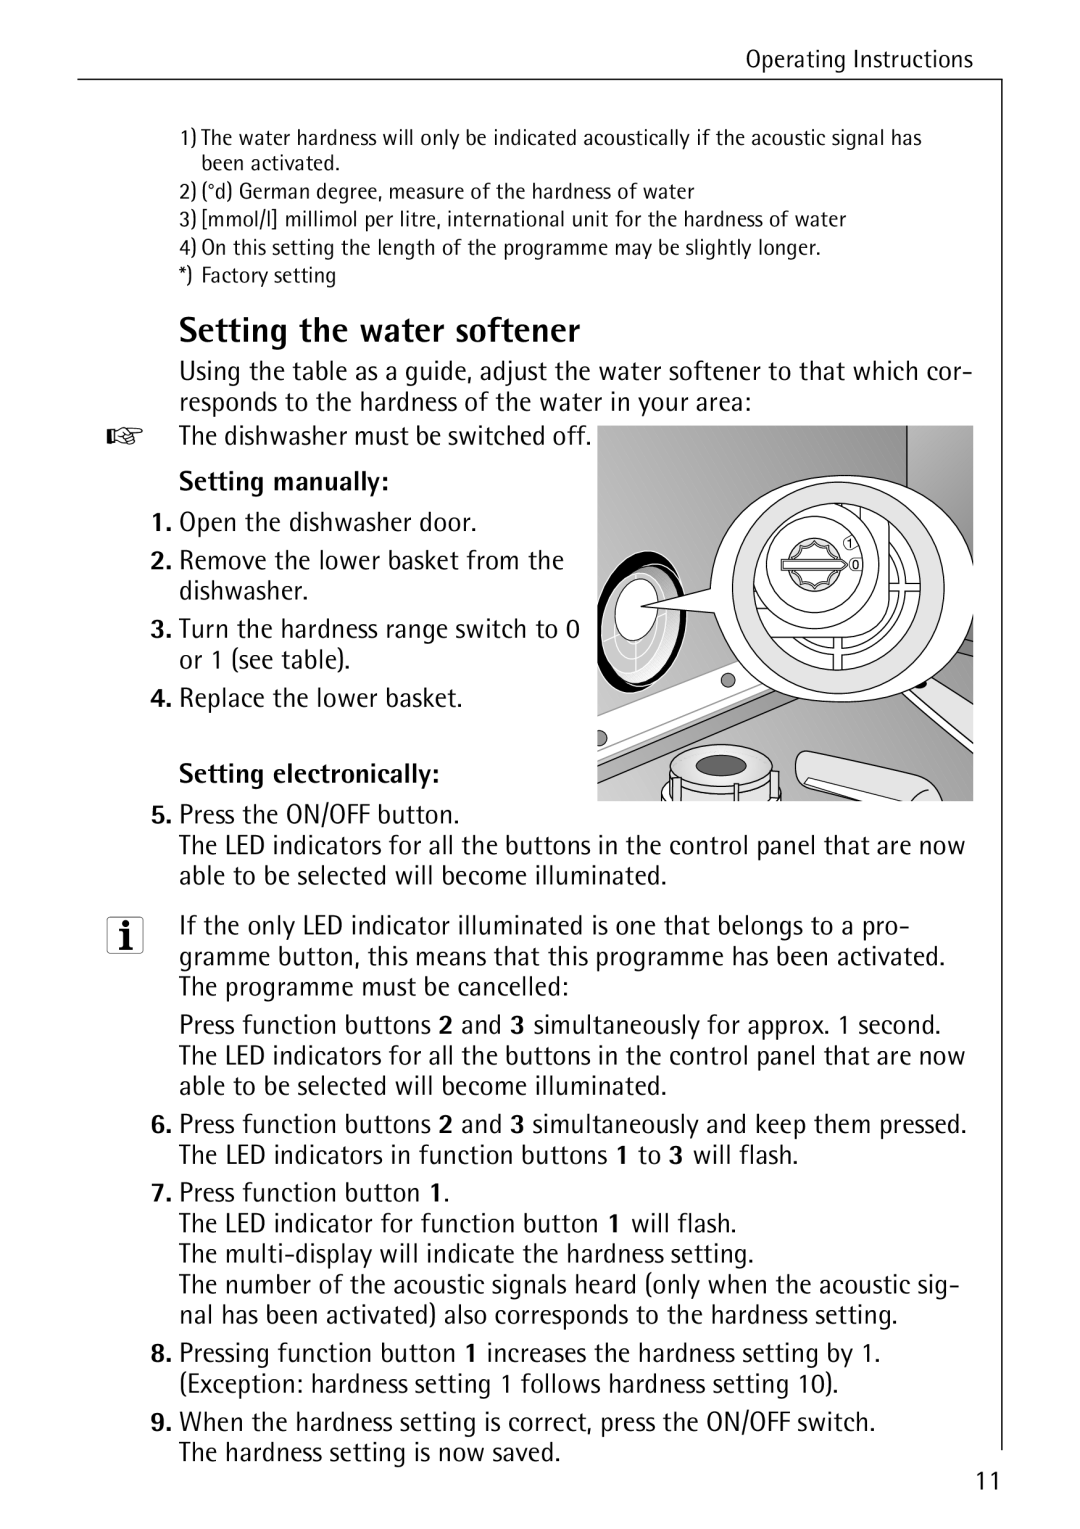 Electrolux 85050 VI Setting the water softener, Setting manually, Setting electronically 